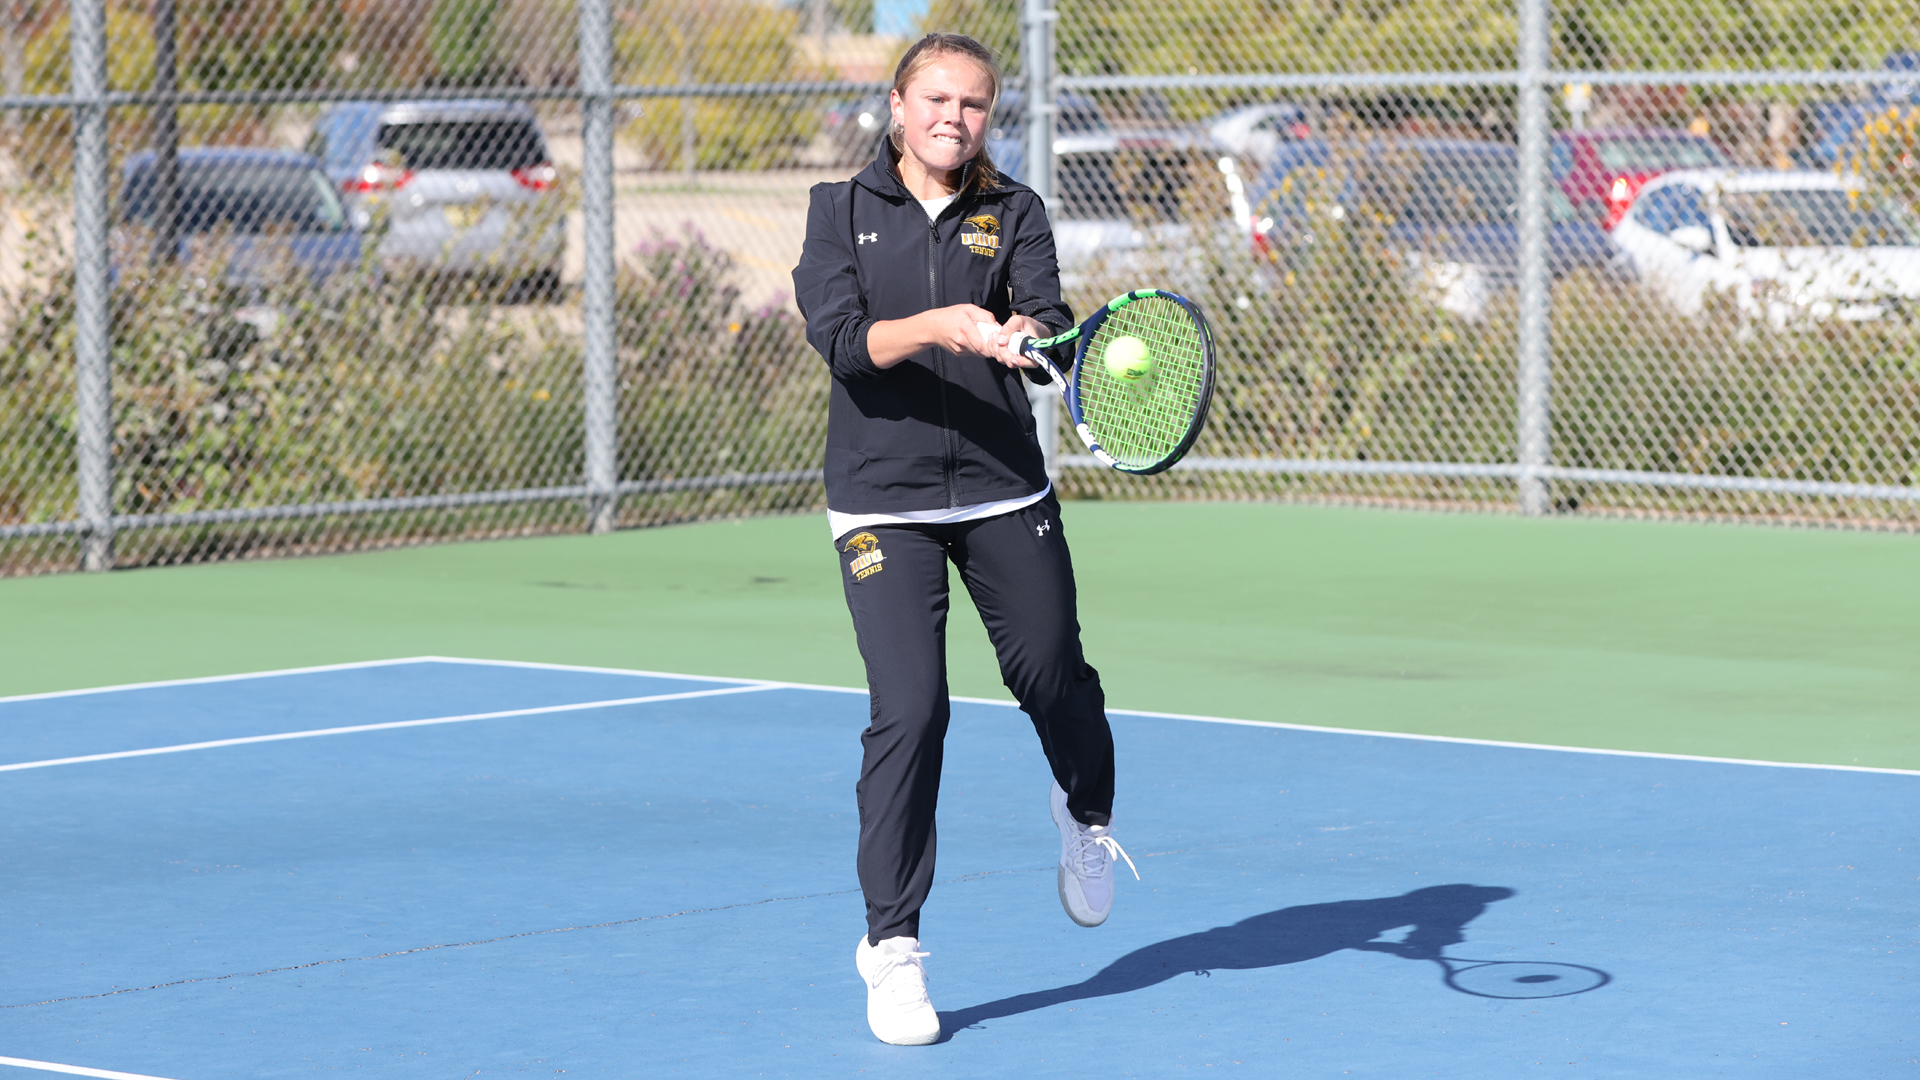 Hannah Stitt beat her No. 6 singles opponent 6-0, 6-2 in the Titans' sweep of the Warriors on Saturday. Photo Credit: Steve Frommell, UW-Oshkosh Sports Information